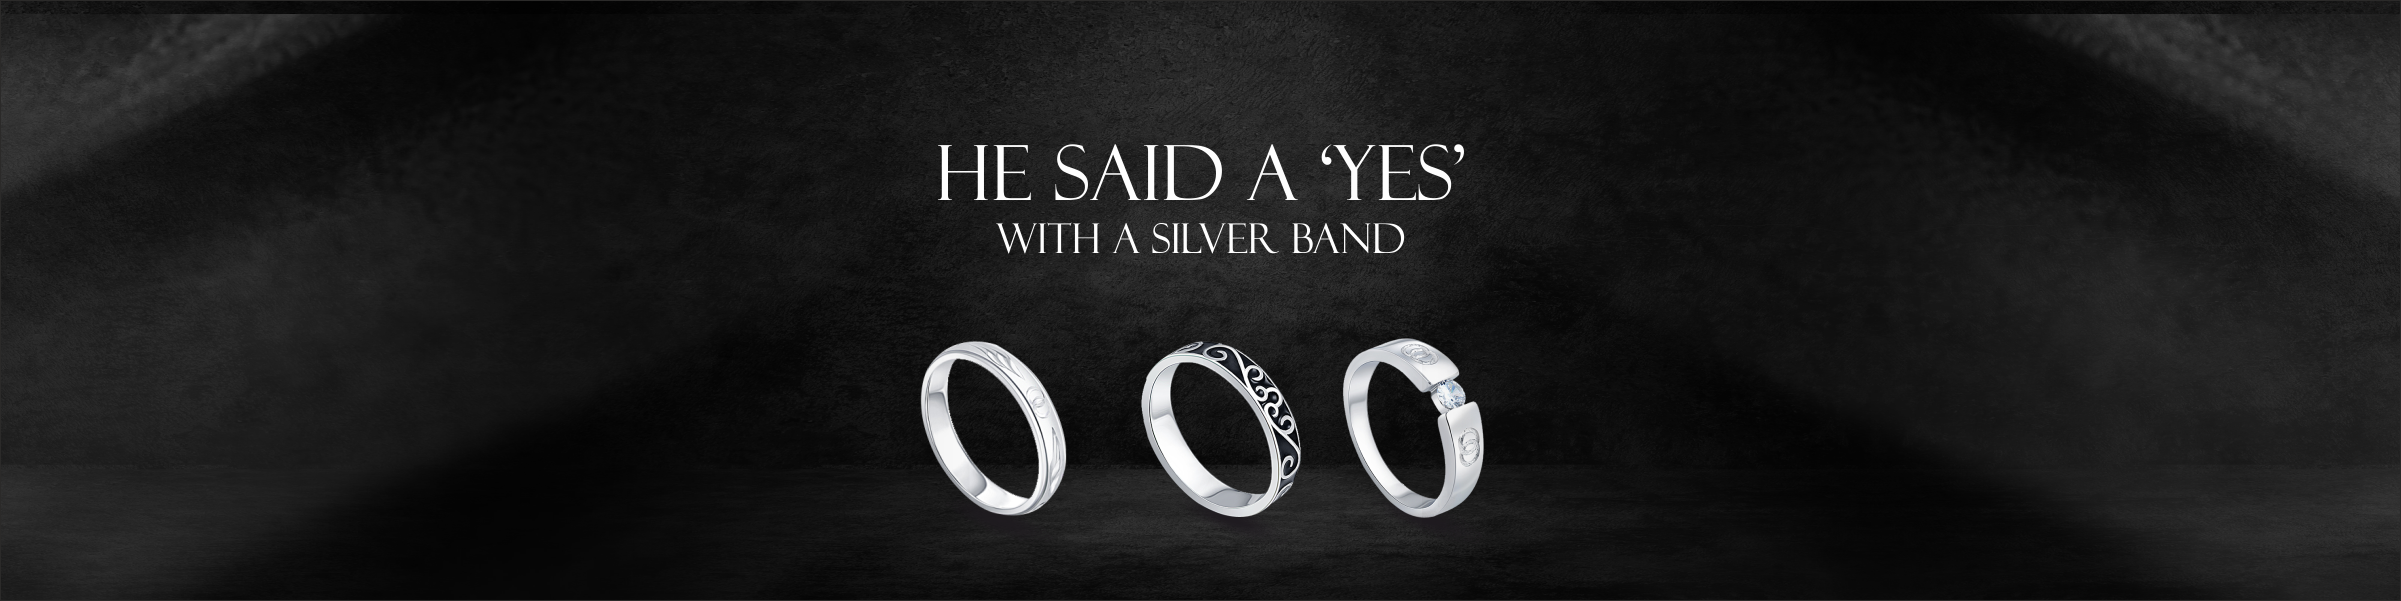 He Said a ‘Yes’ With a Silver Band